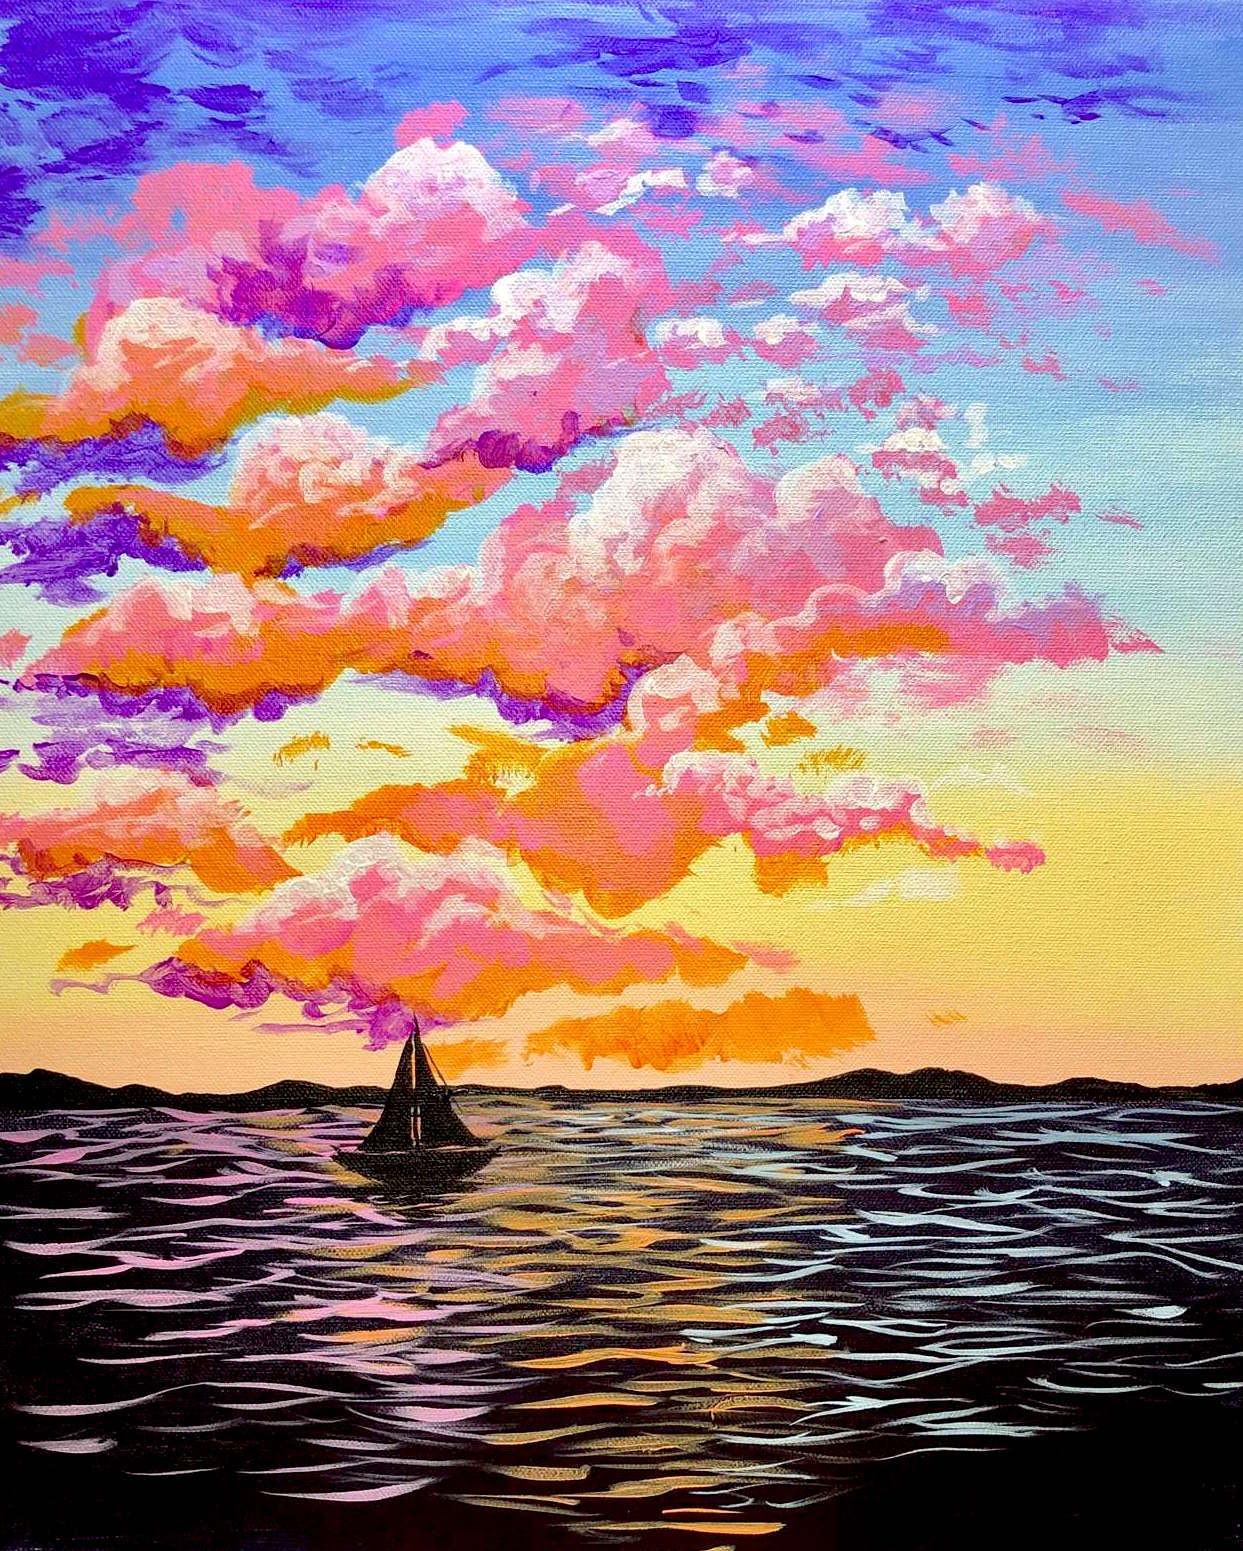 SOLD OUT! Sailing into the Sunset